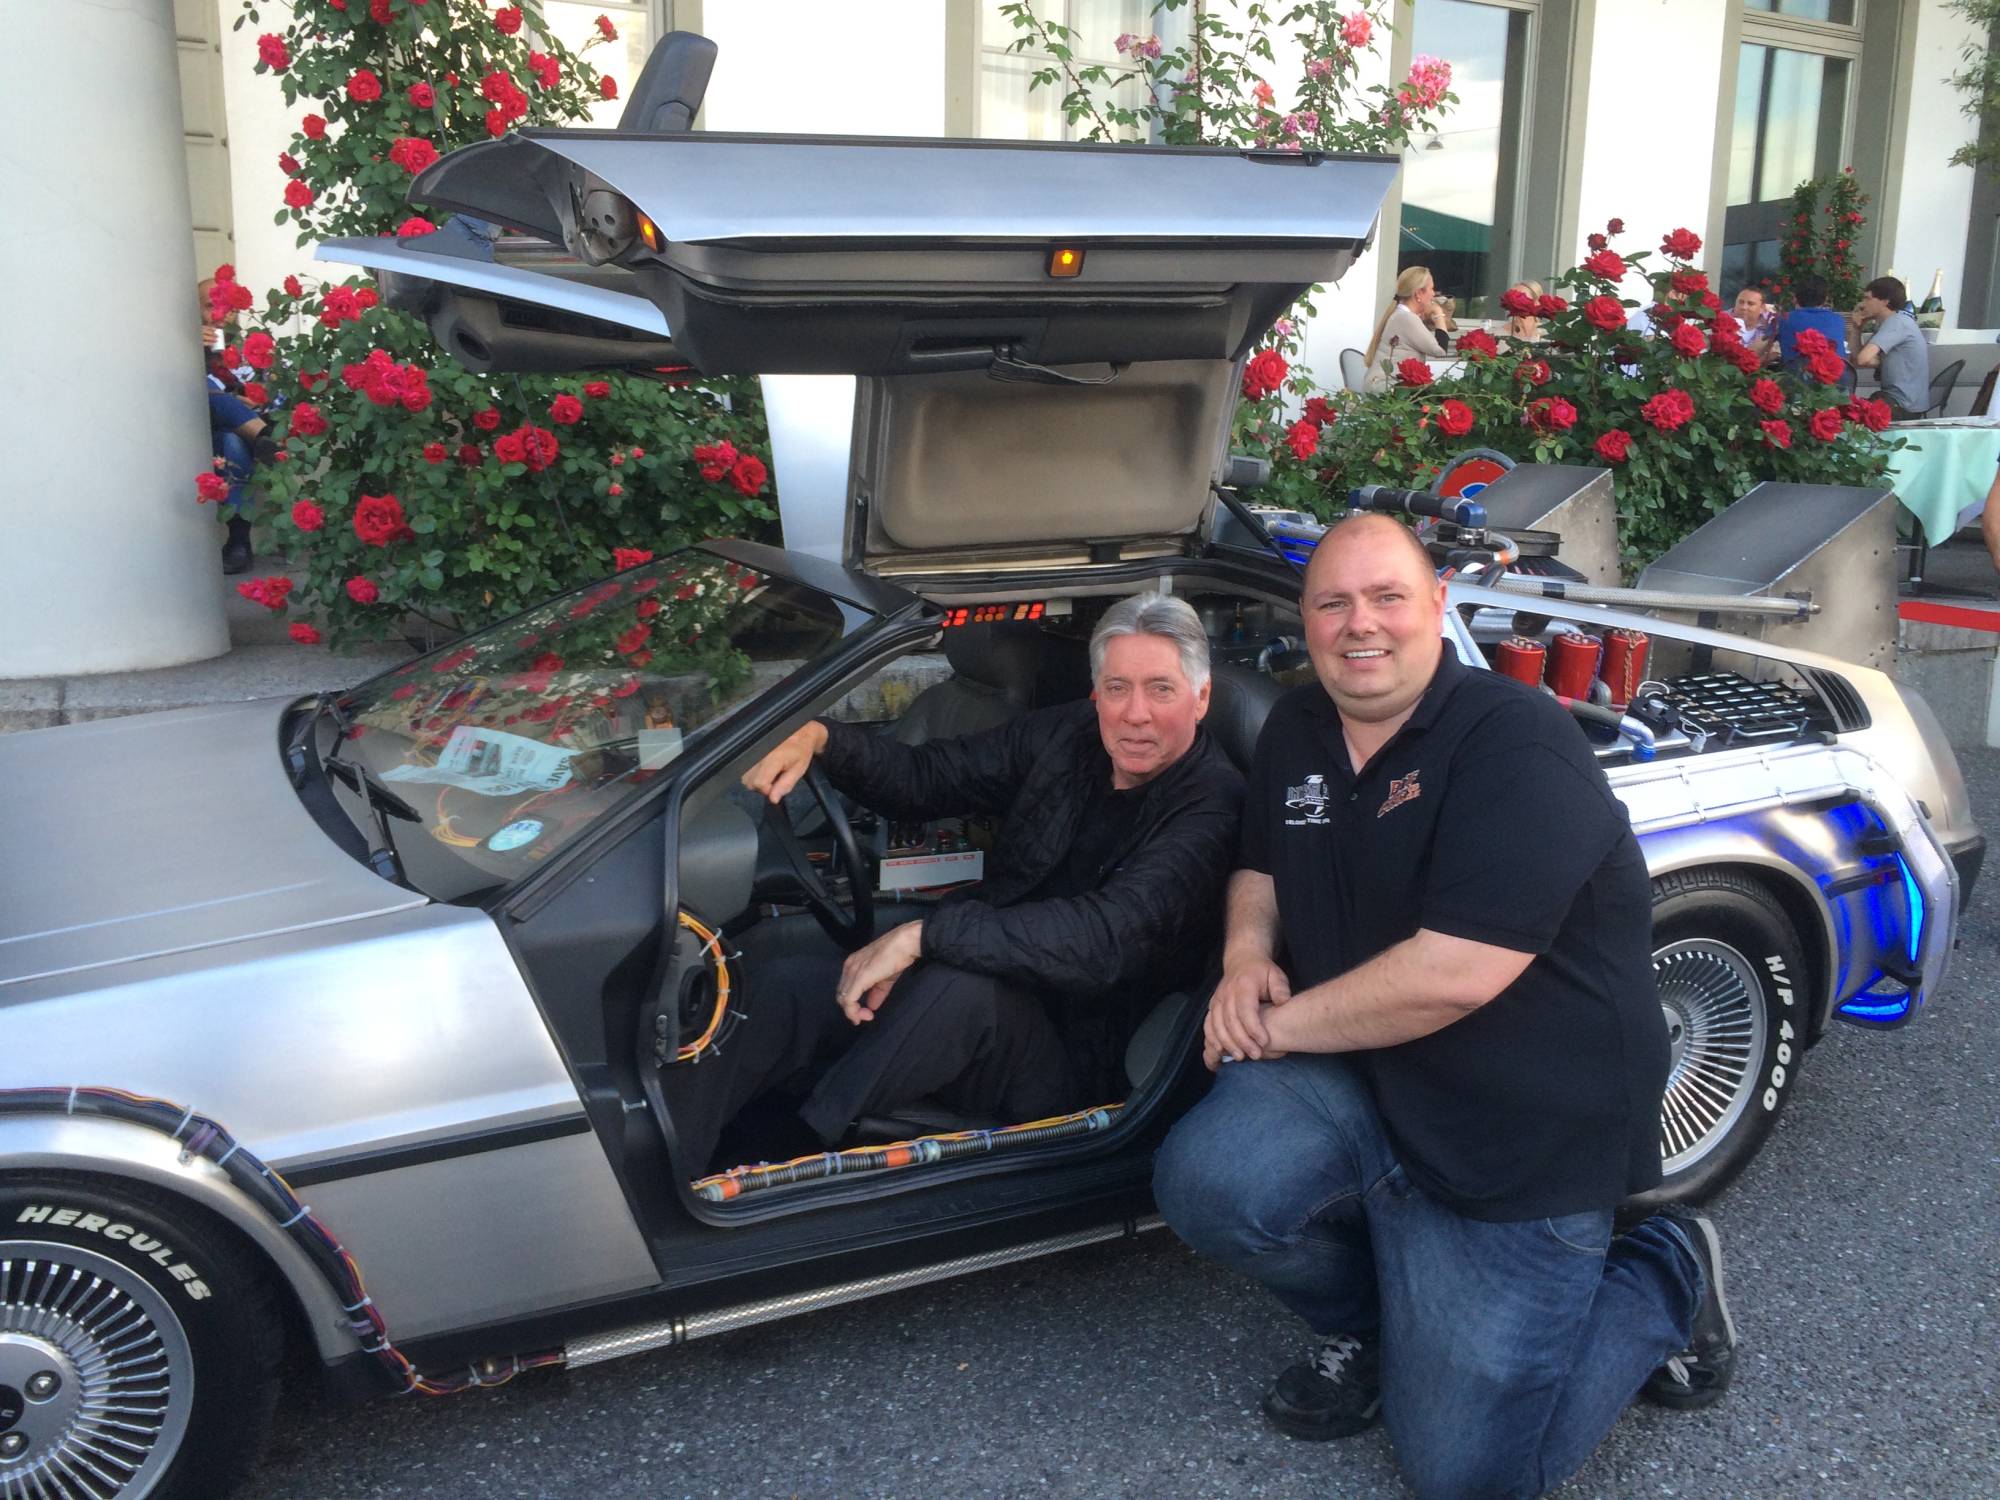 Alan Silvestri in the BTTF Car DeLorean Time Machine at the World Premiere of Back to the Future live in Concert held in Switzerland in 2015